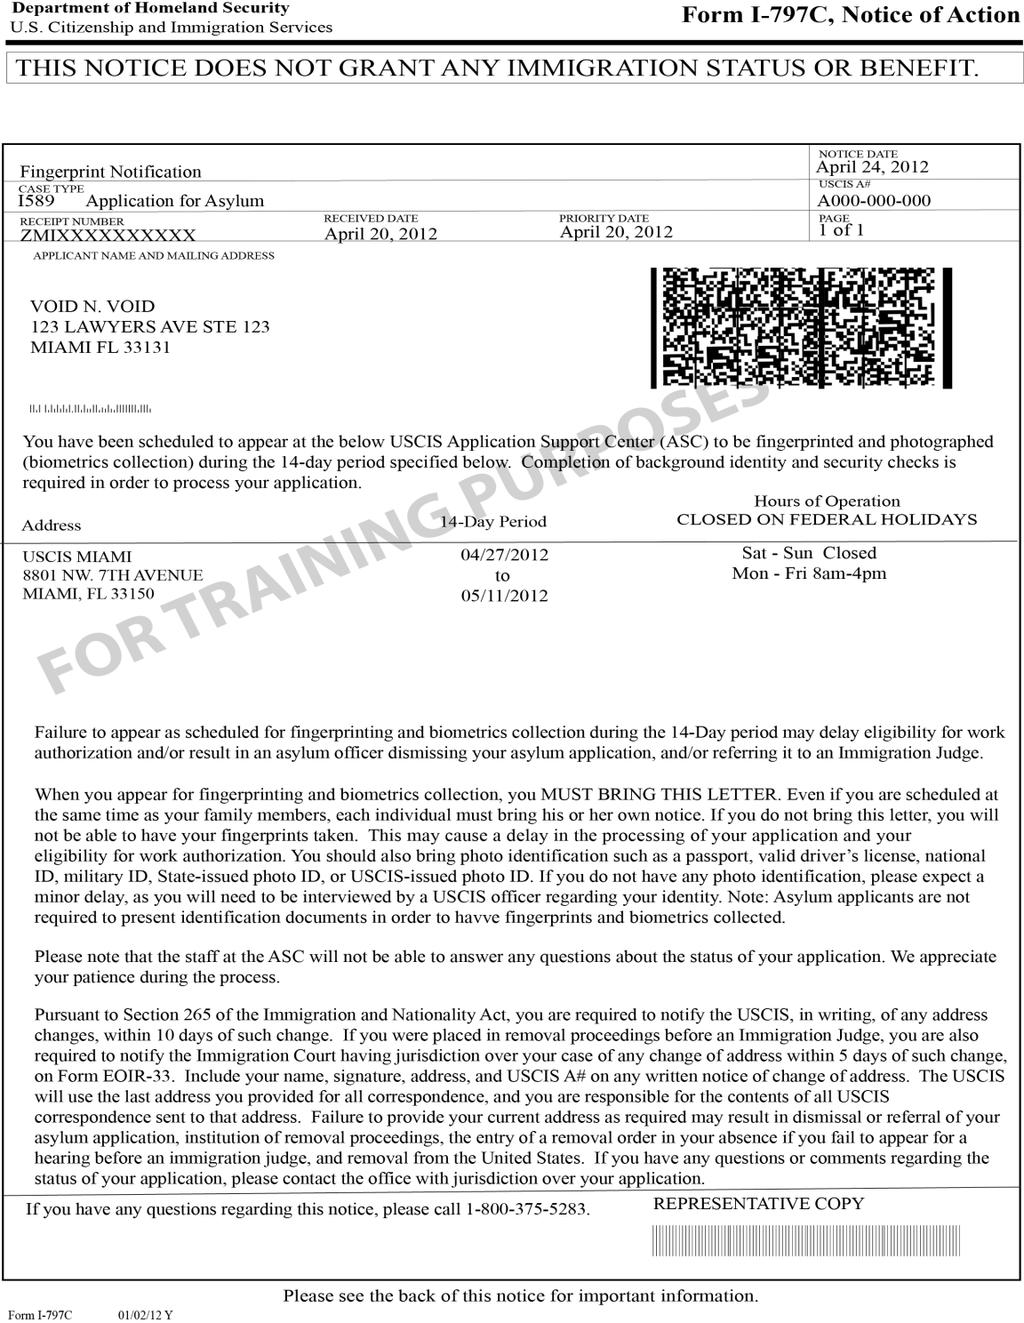 Form I-797C USCIS otice of ction Receipt of sylum pplication I-797C Immigration status Identity Date of entry or status ote: Starting on pril 2, 2012, USCIS began to print Form I-797C, otice of ction